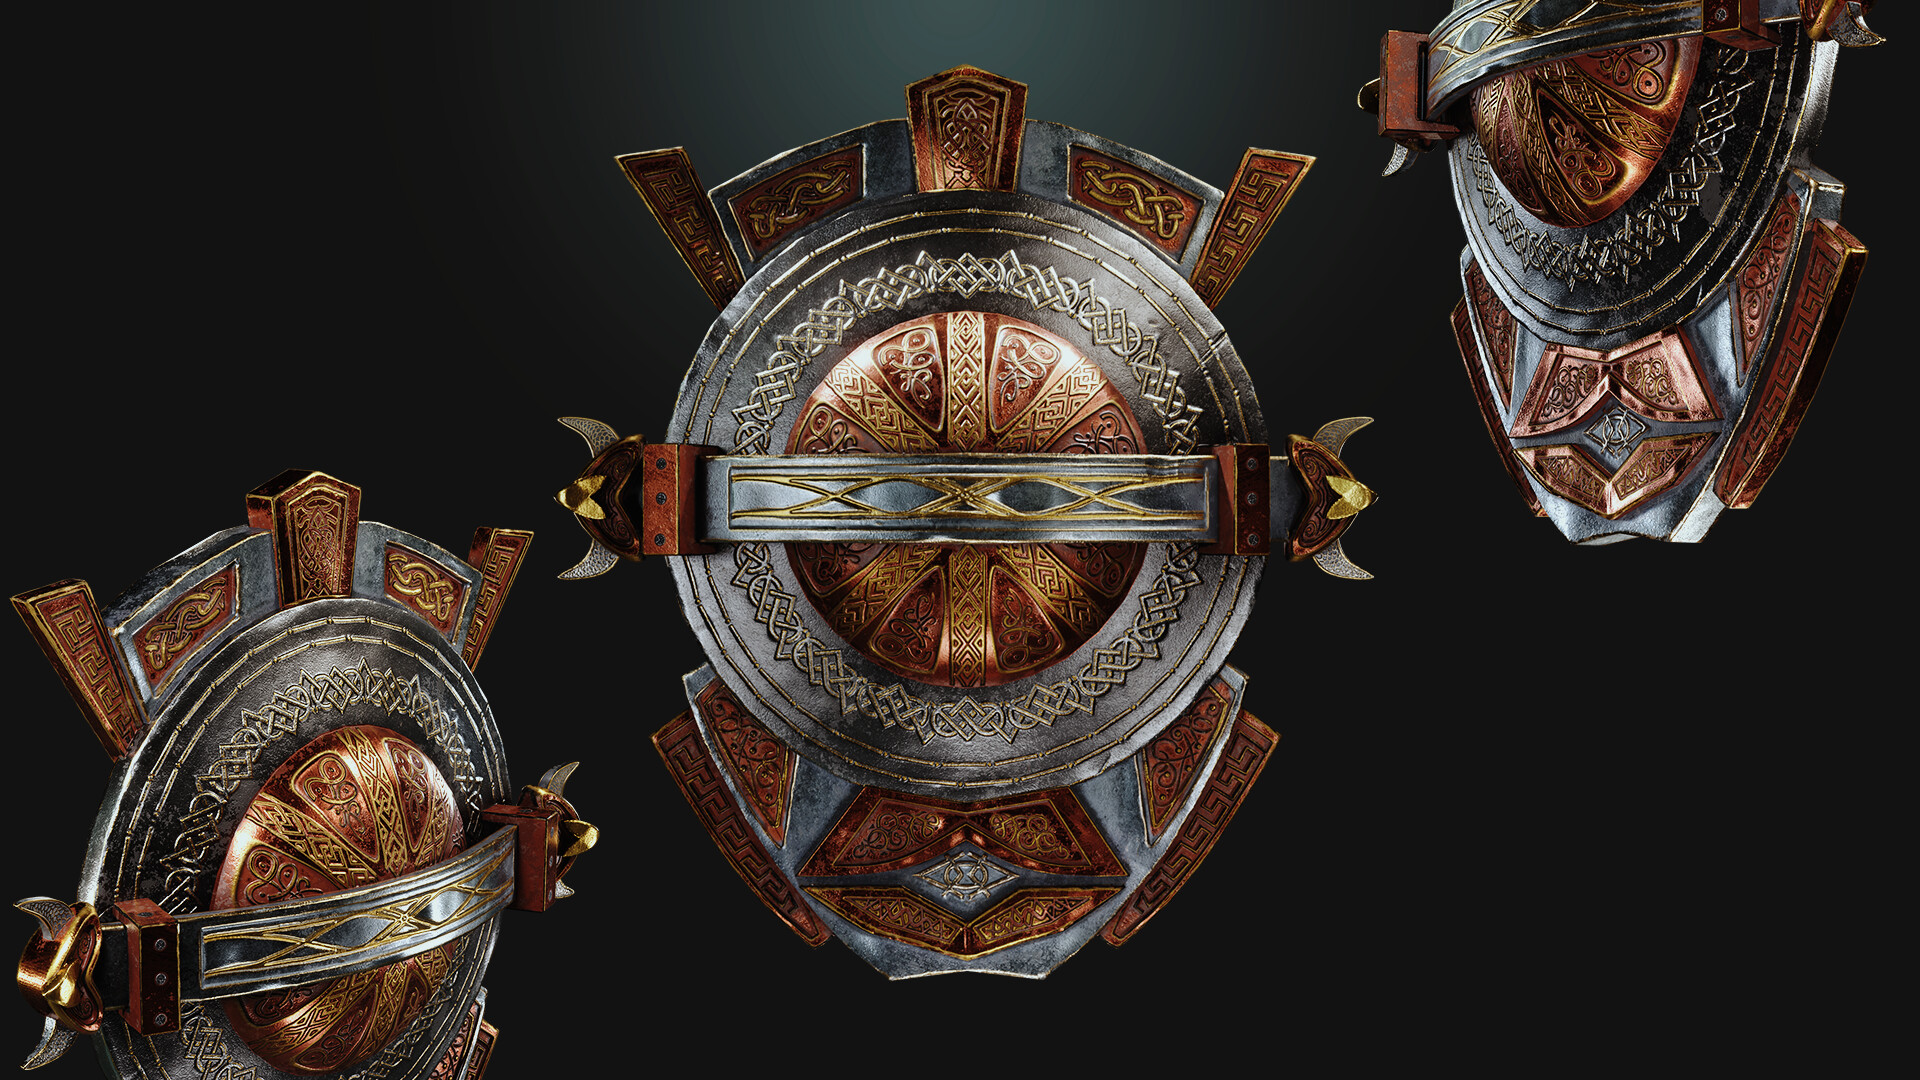 Nine shield. Stylized Weapon. Рыцари щит исторический артефакт. Epic Knights: Shields, Armor and Weapons крафты. Crypto Weapon stylized.